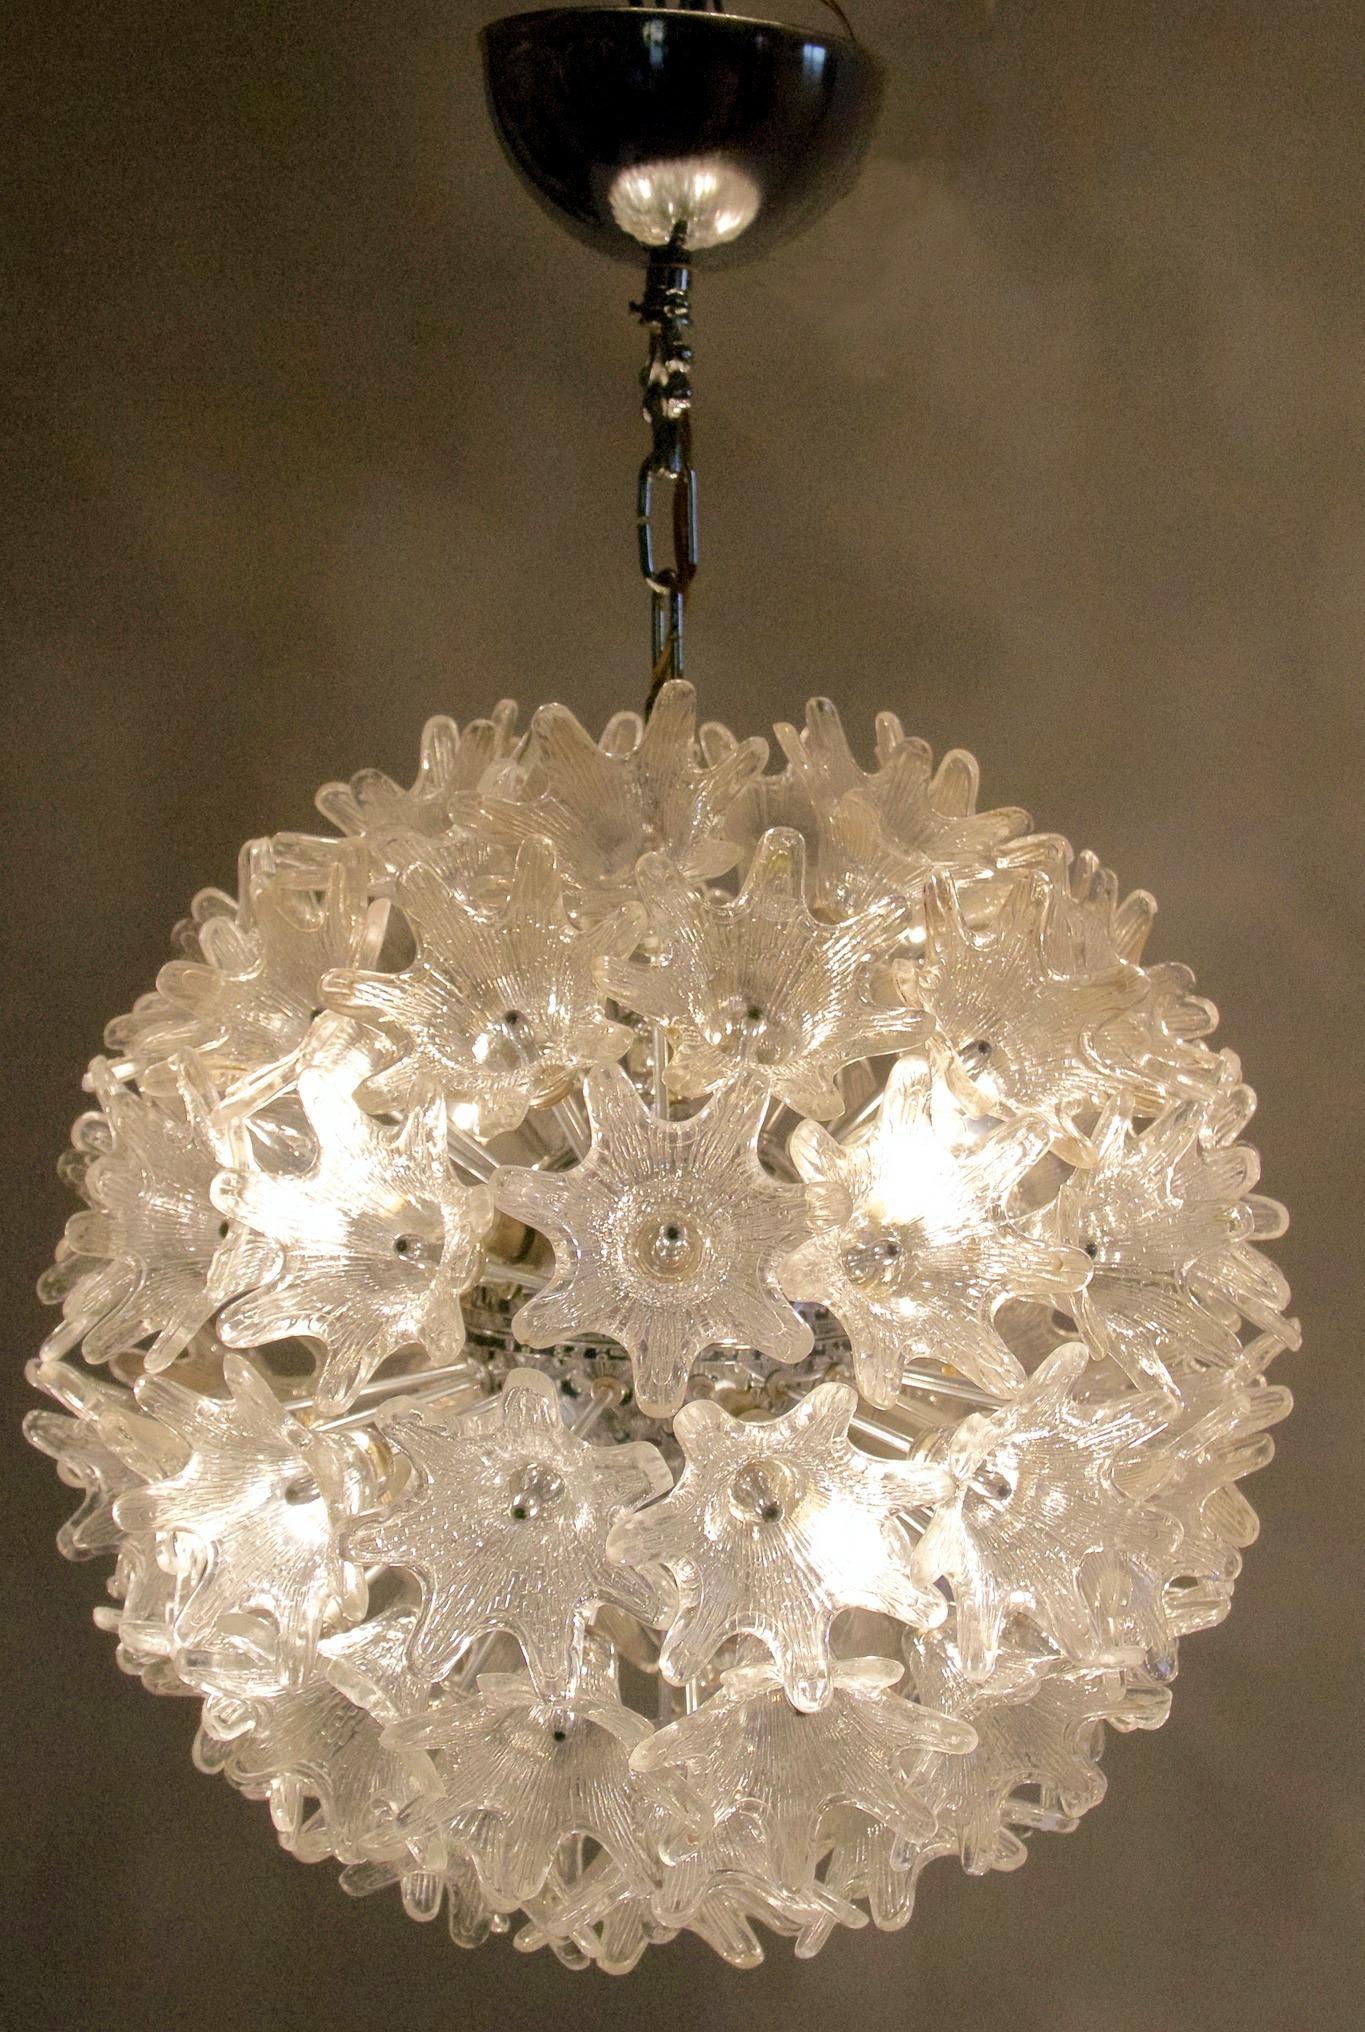 Italian Midcentury Sputnik Chandelier by Paolo Venini for VeArt Murano, Italy For Sale